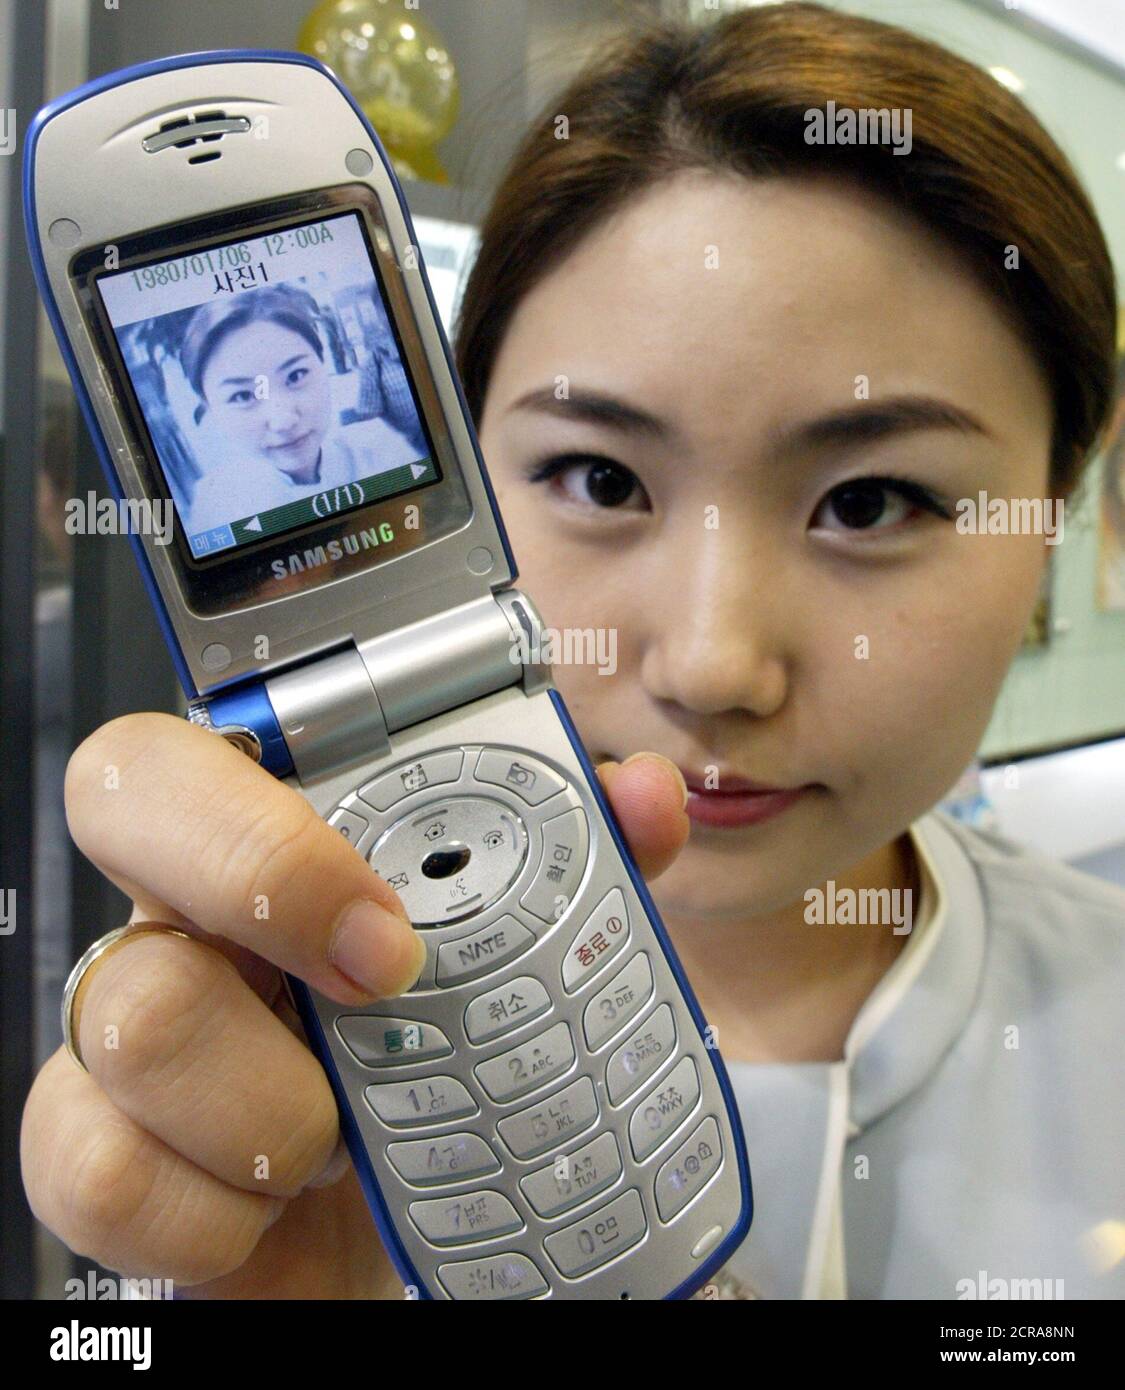 resultaat hersenen Duizeligheid A camera-equipped mobile phone is demonstrated in Seoul July 10, 2003.  Big-name, high-tech South Korean companies have declared war against camera-equipped  mobile phones, ironically including Samsung Electronics Co - - the world's